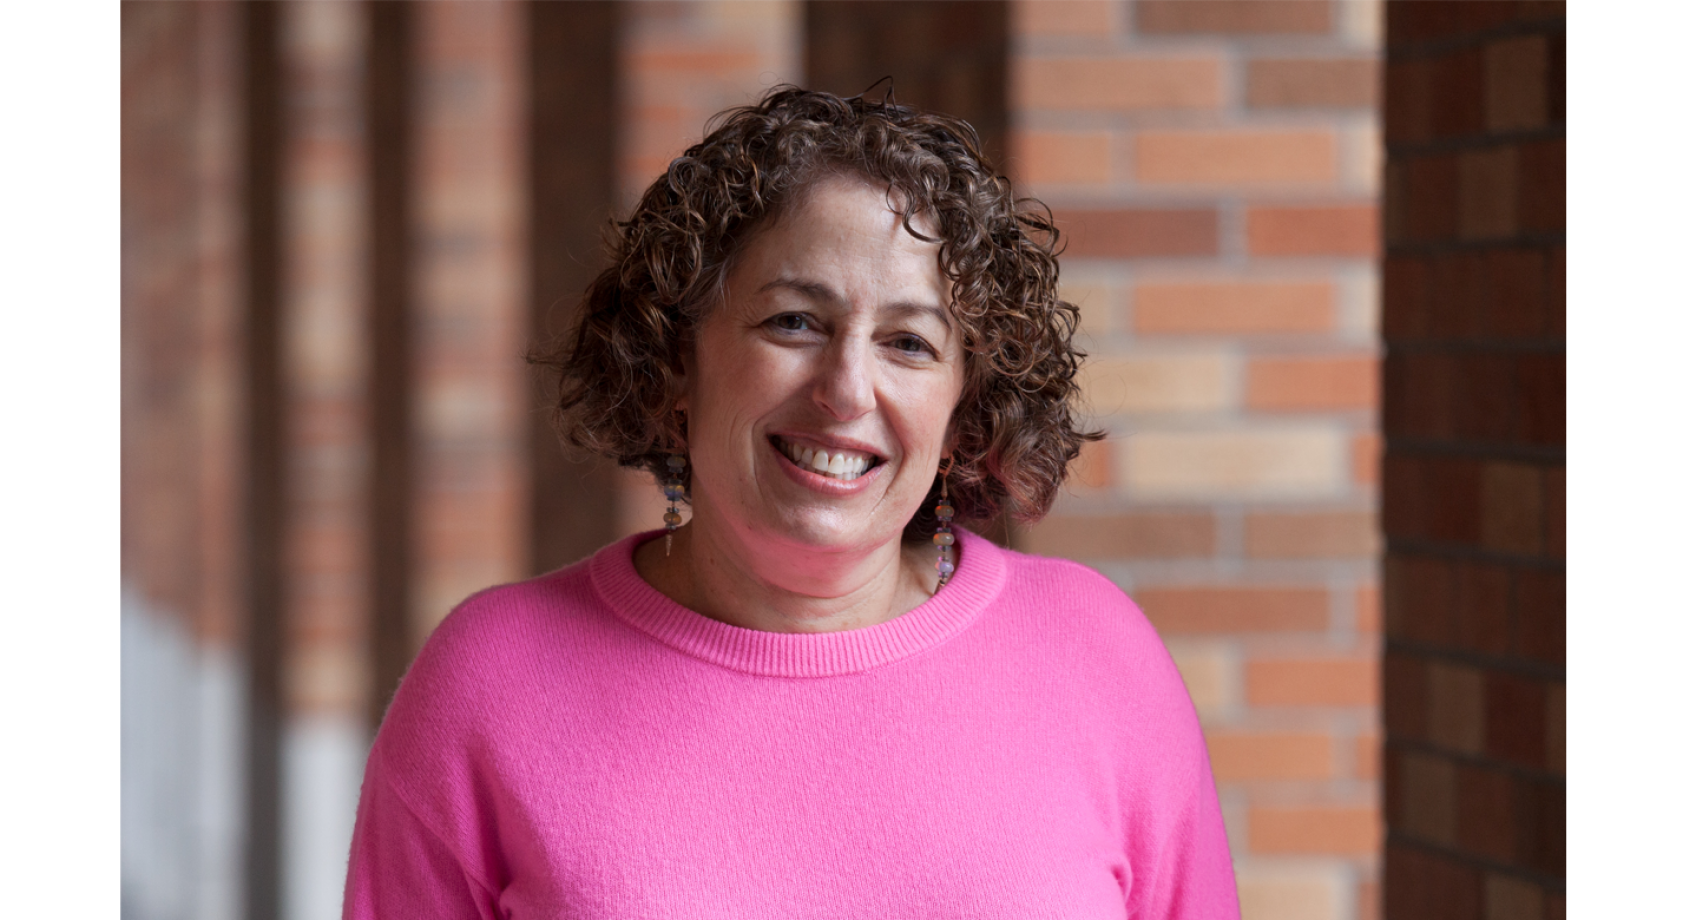 Eve Riskin returns to UW ECE with plans to share the STARS program nationwide Banner